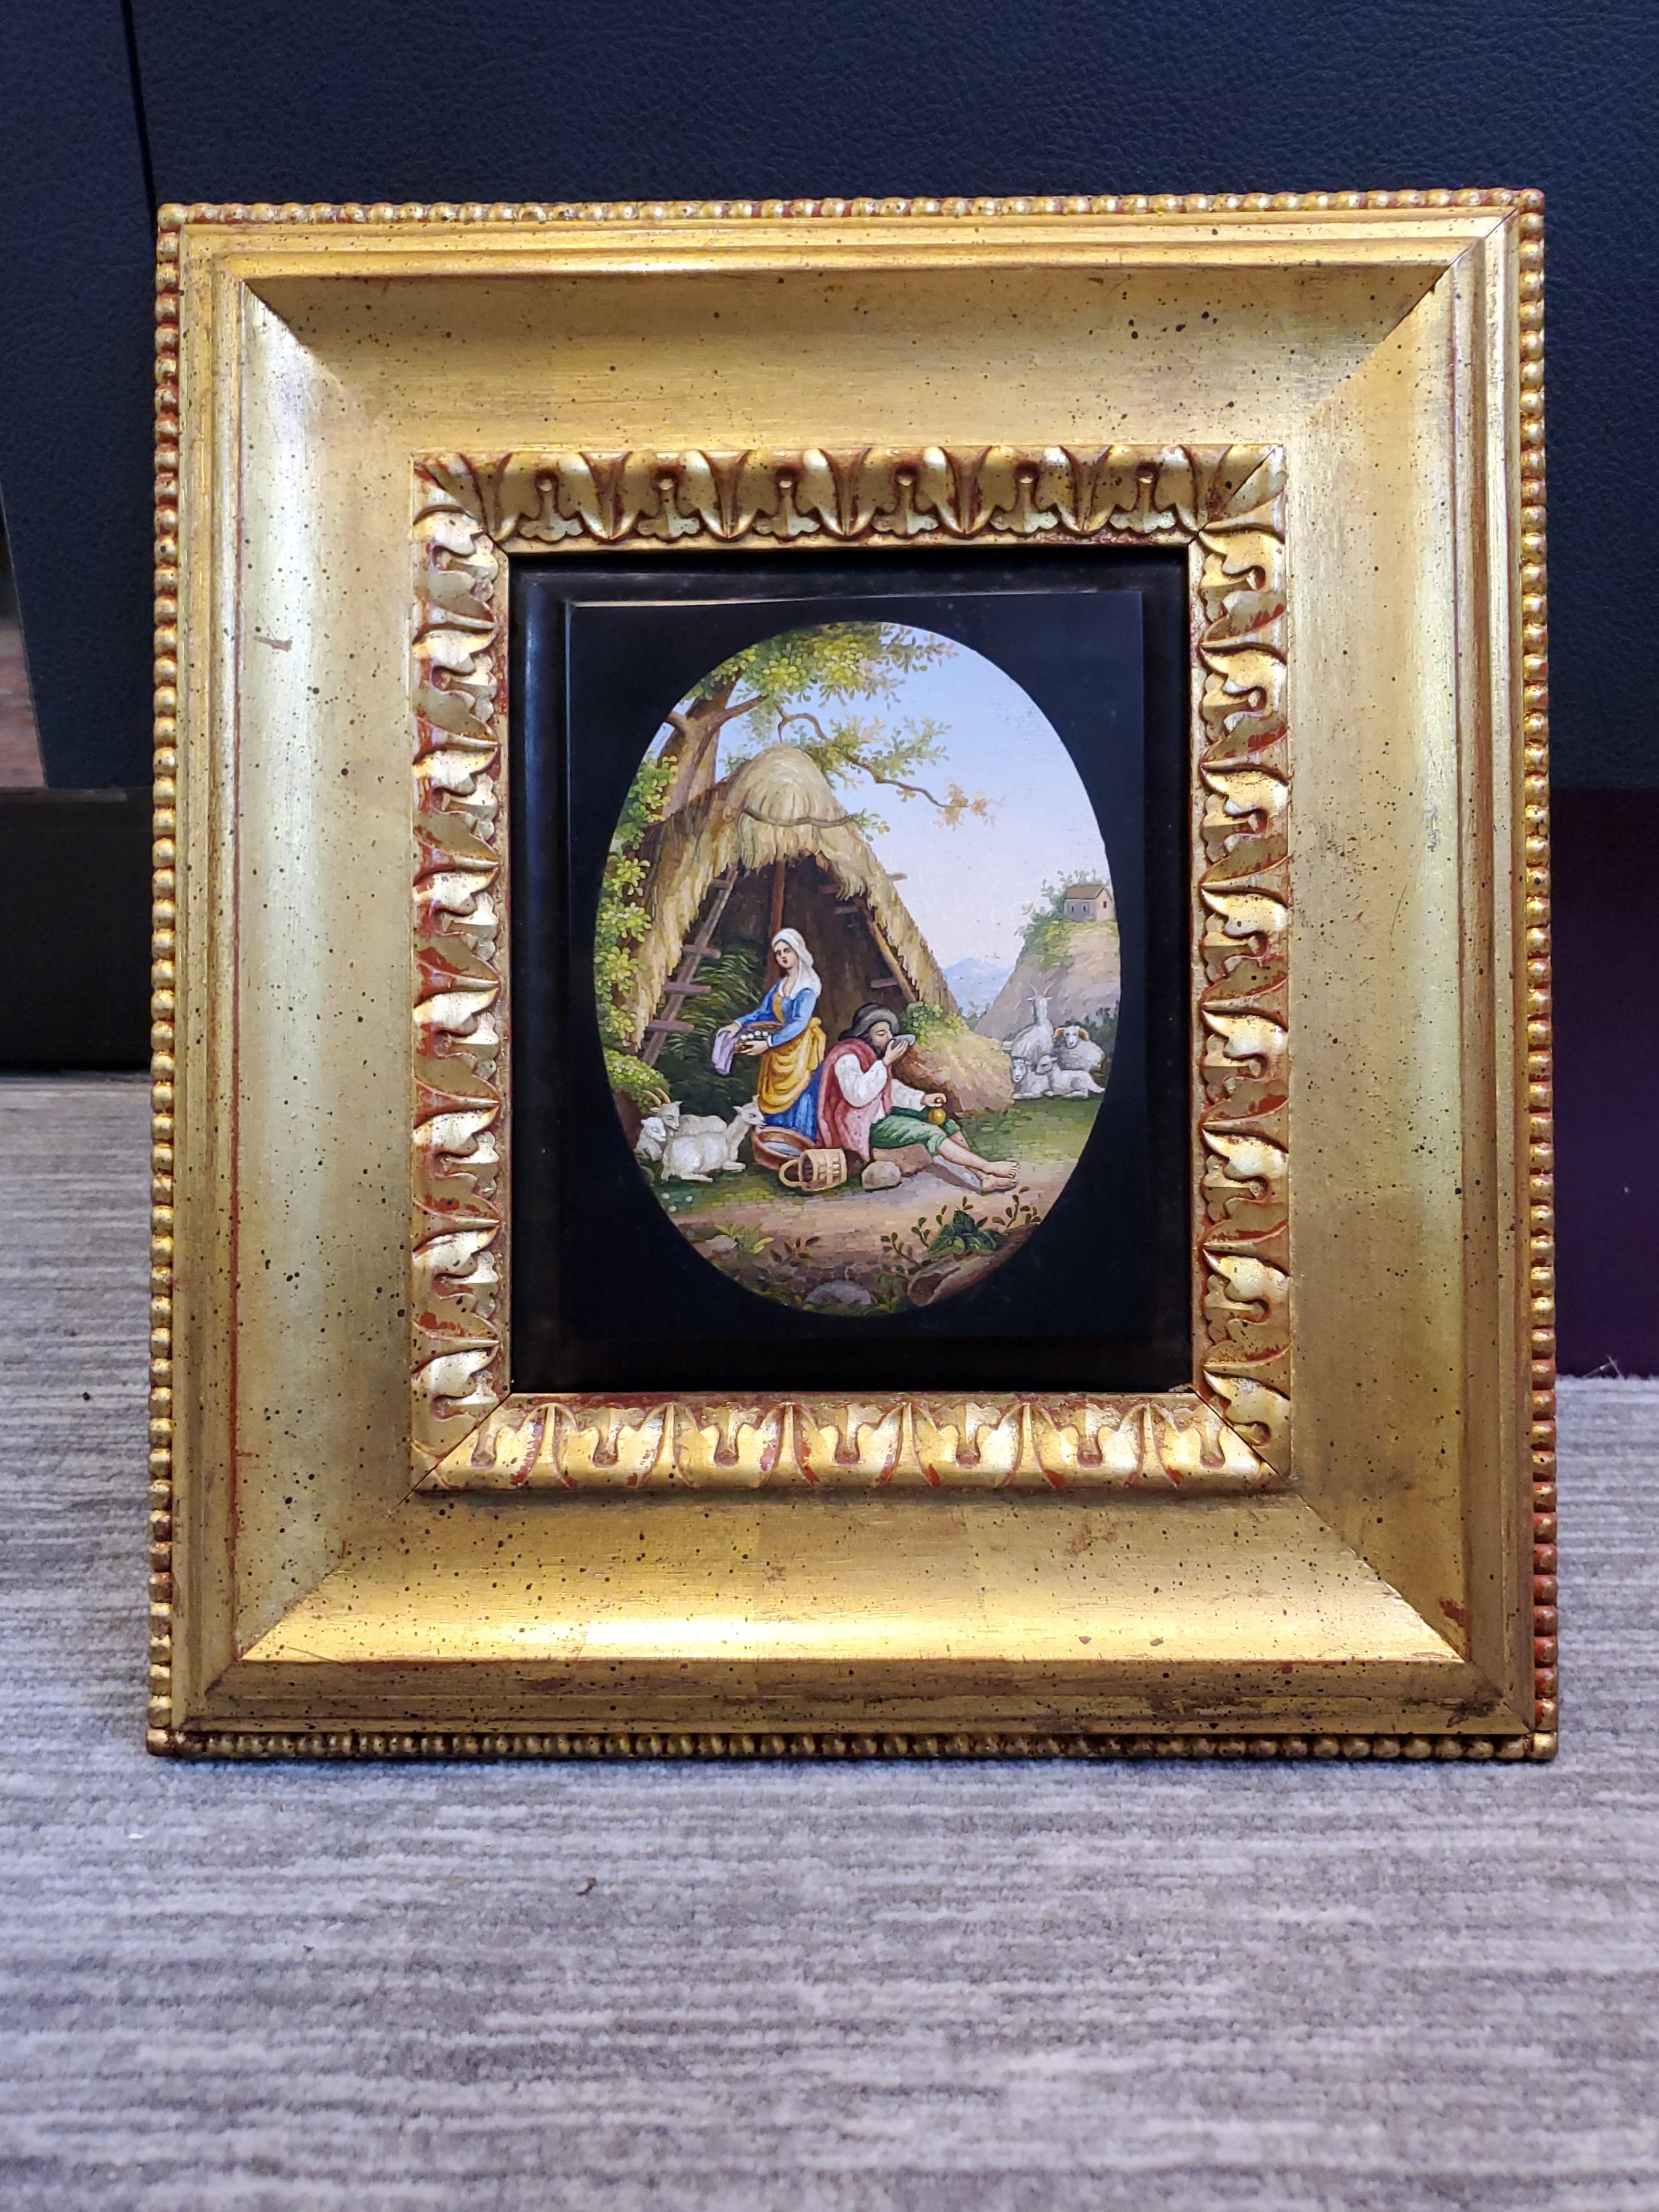 Important Micromosaic depicting a Pastoral Scene with woman, Man and Sheep 

Circa 1850's, Italy
 
Dimensions: 
Micromosaic without Frame: approximately 7 x 6.75 inches
With Frame: approximately 12.75 x 11.5 inches.